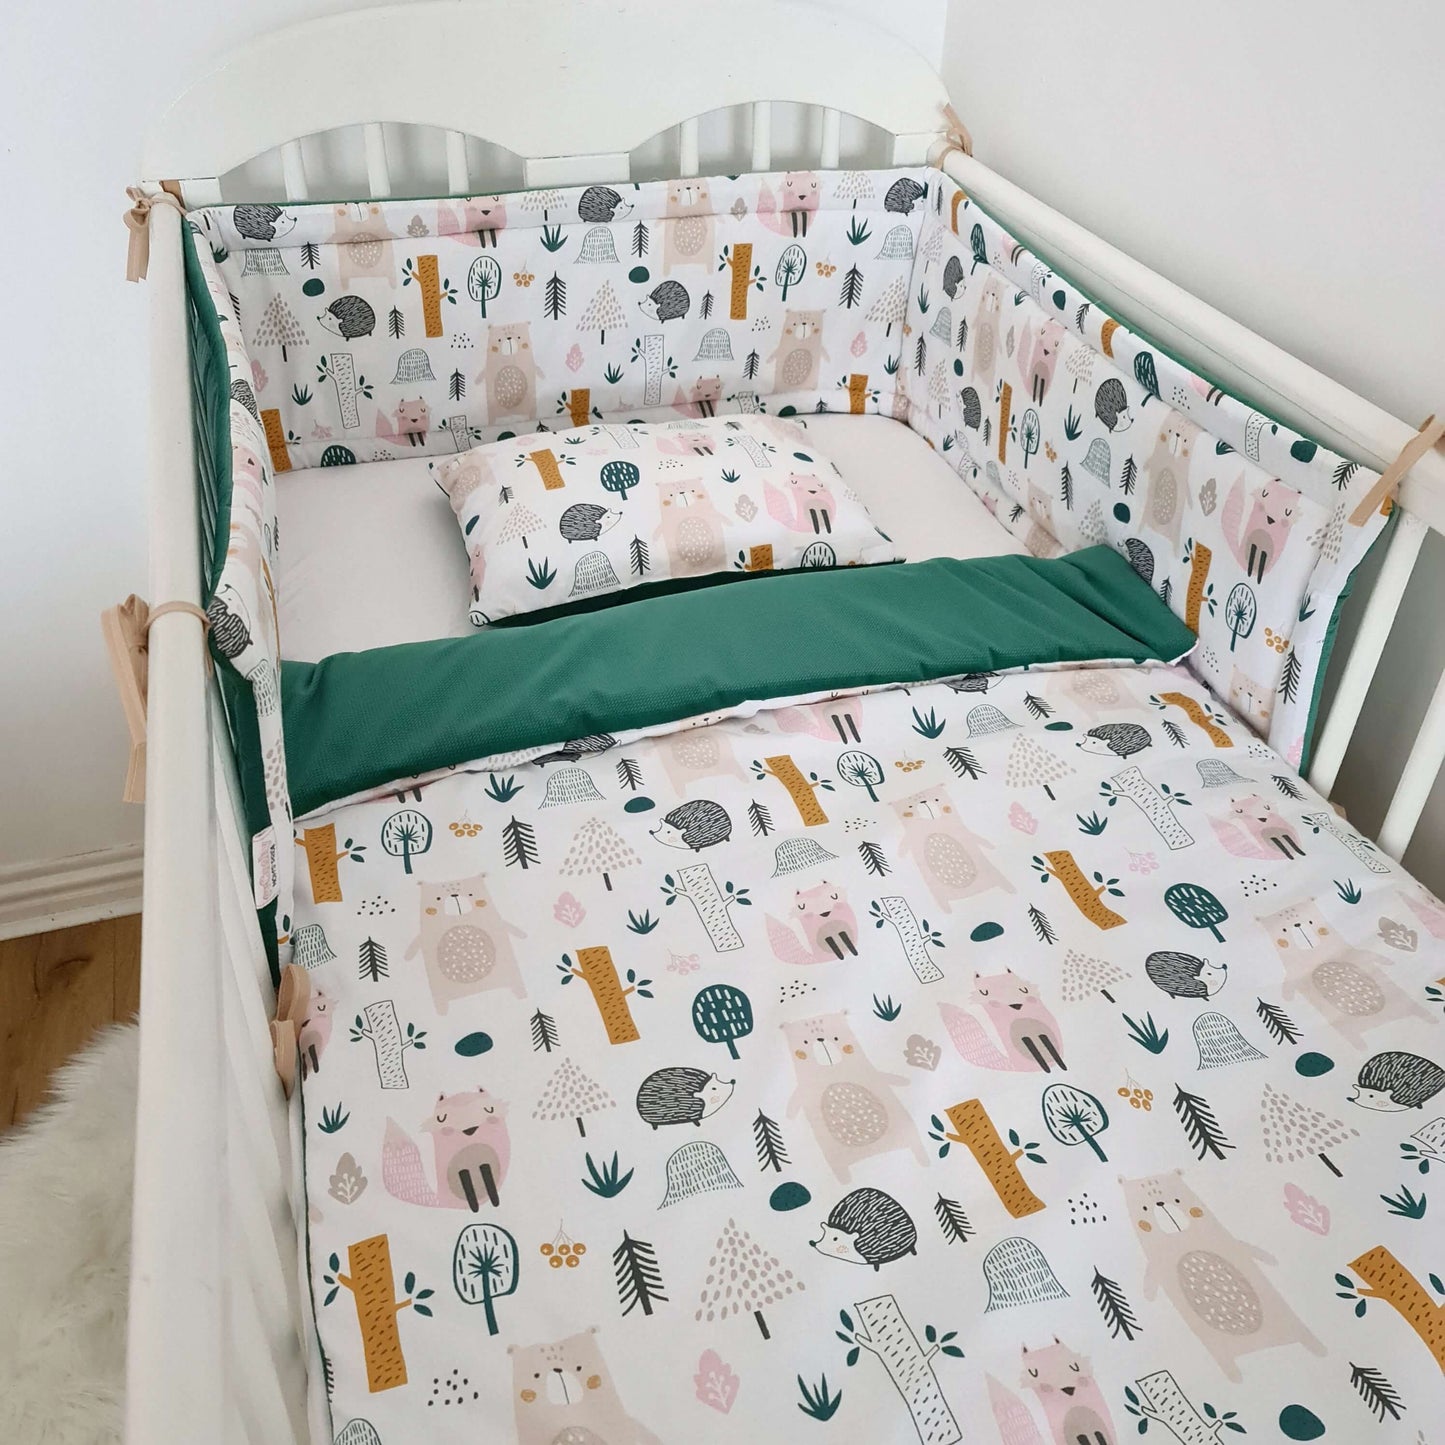 luxurious baby bedding from velvet and cotton cot bumper protector duvet